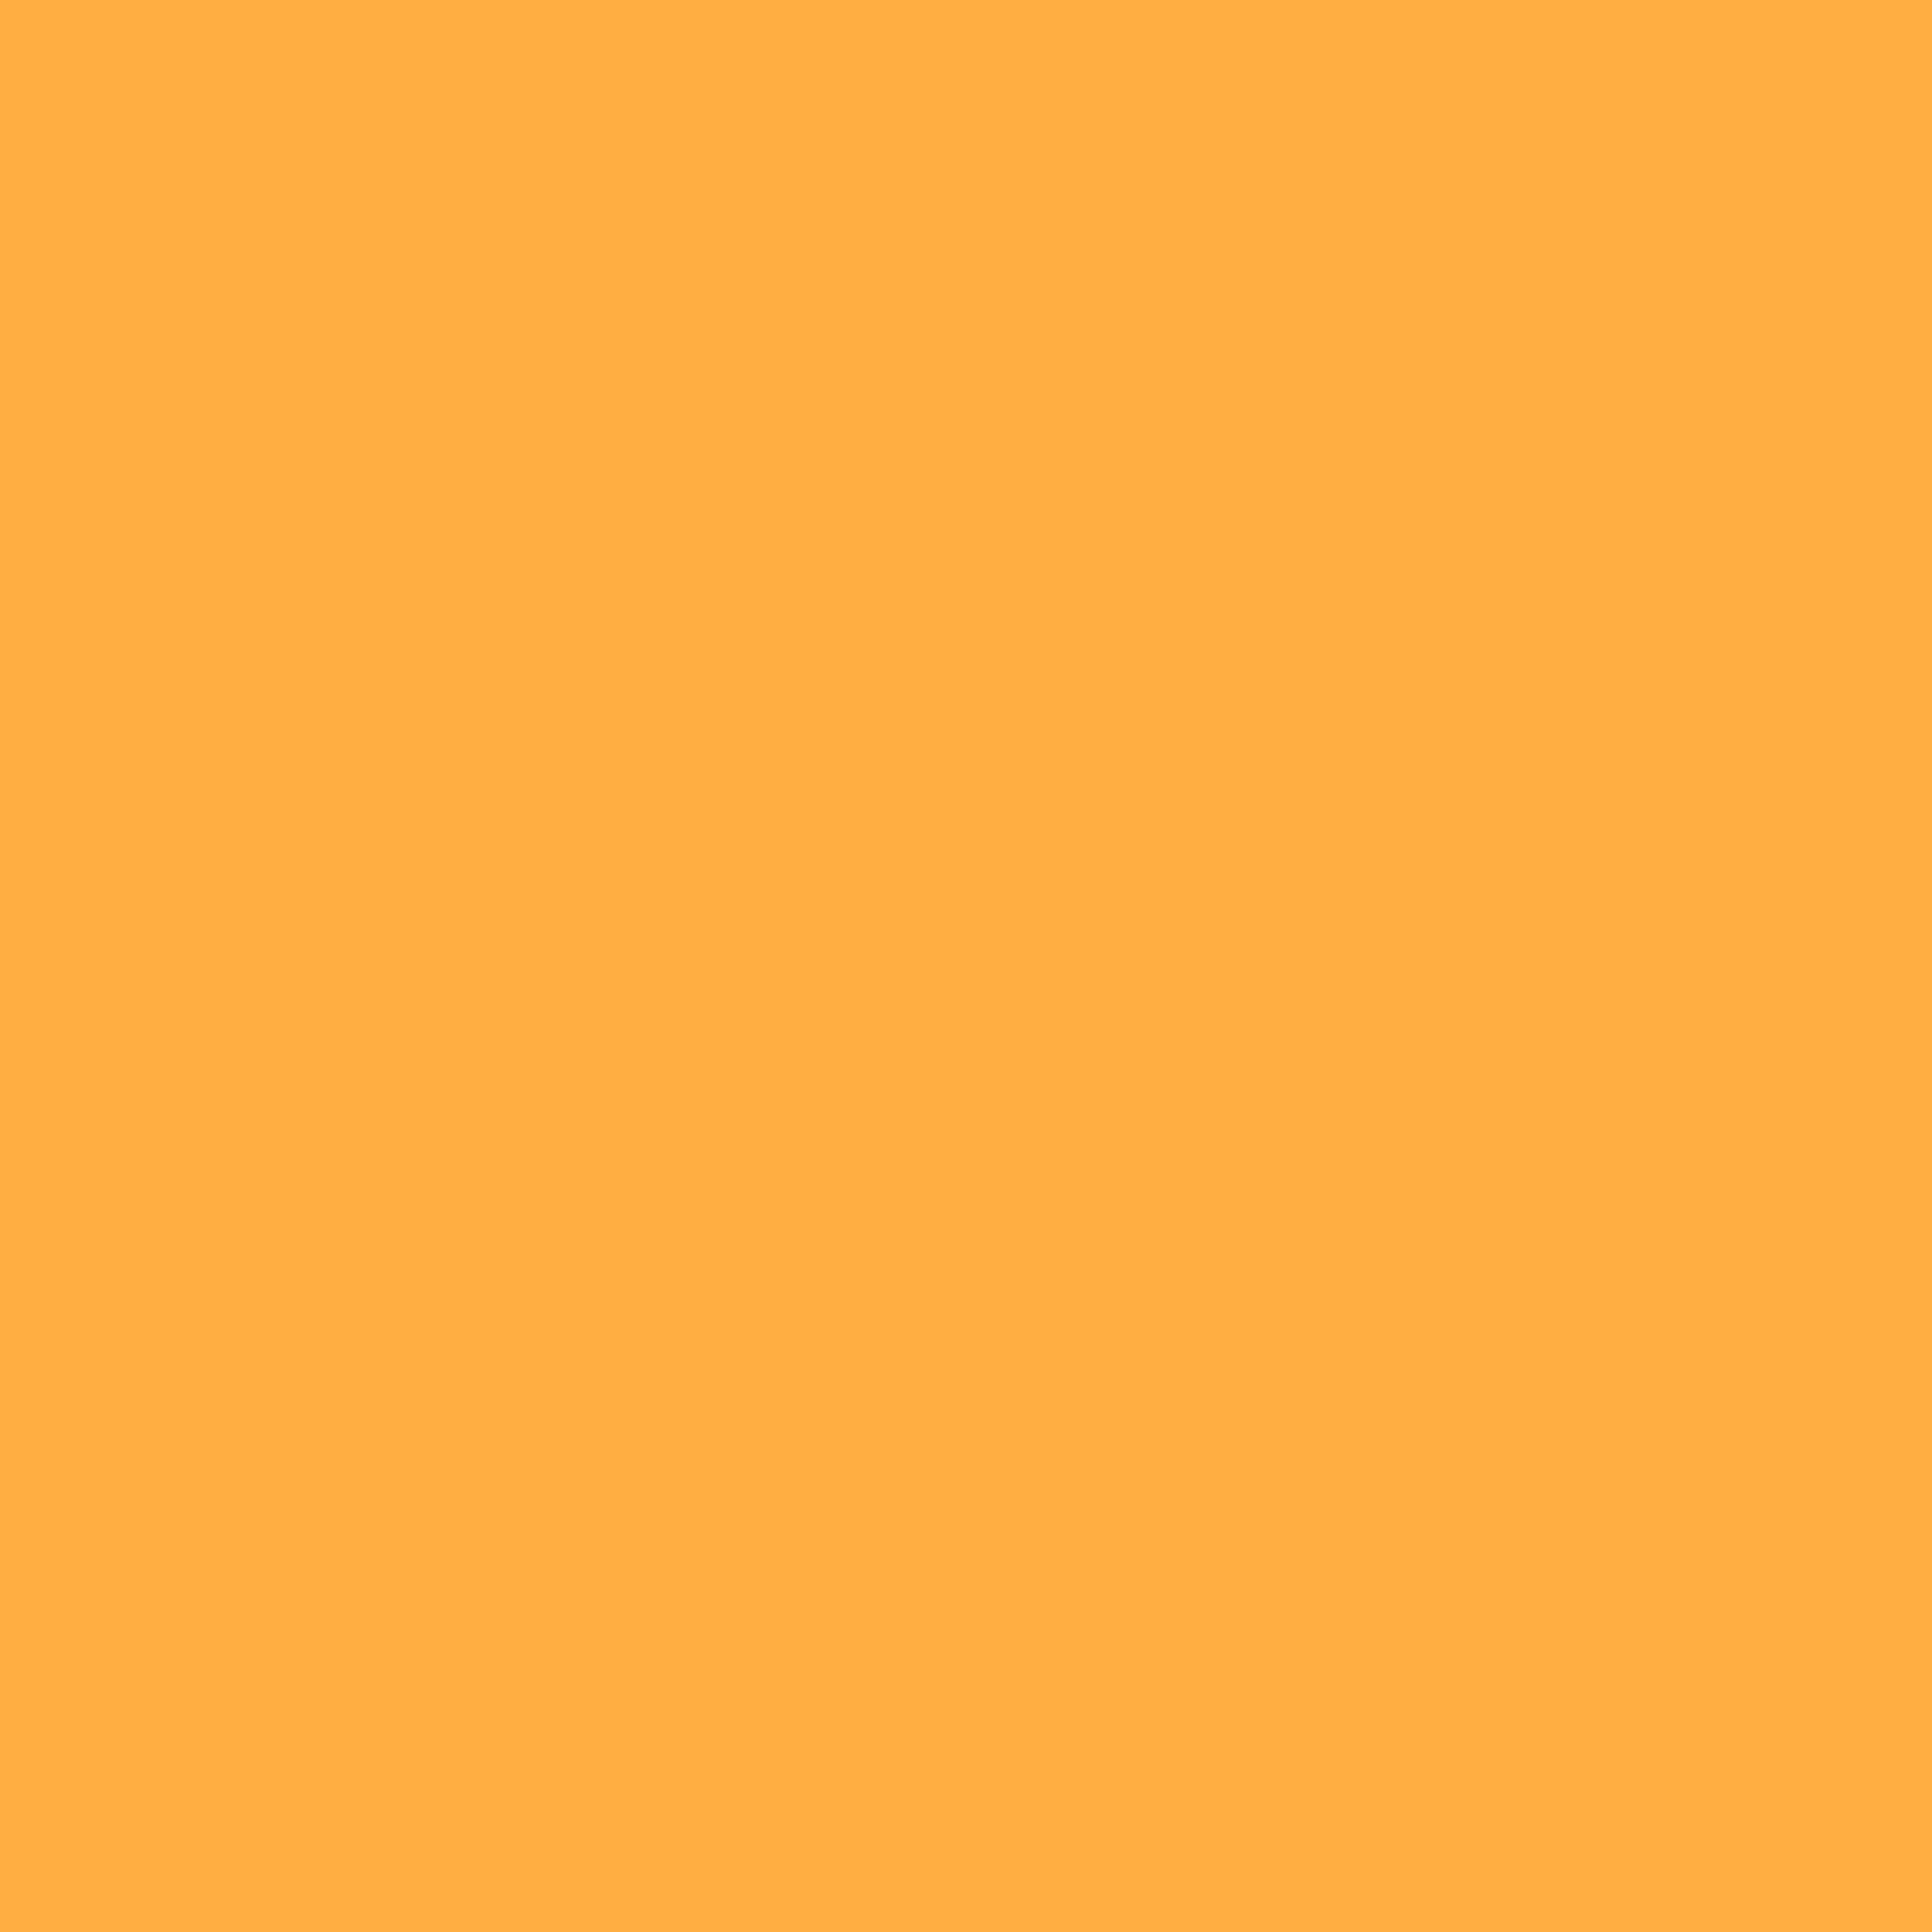 3600x3600 Yellow Orange Solid Color Background